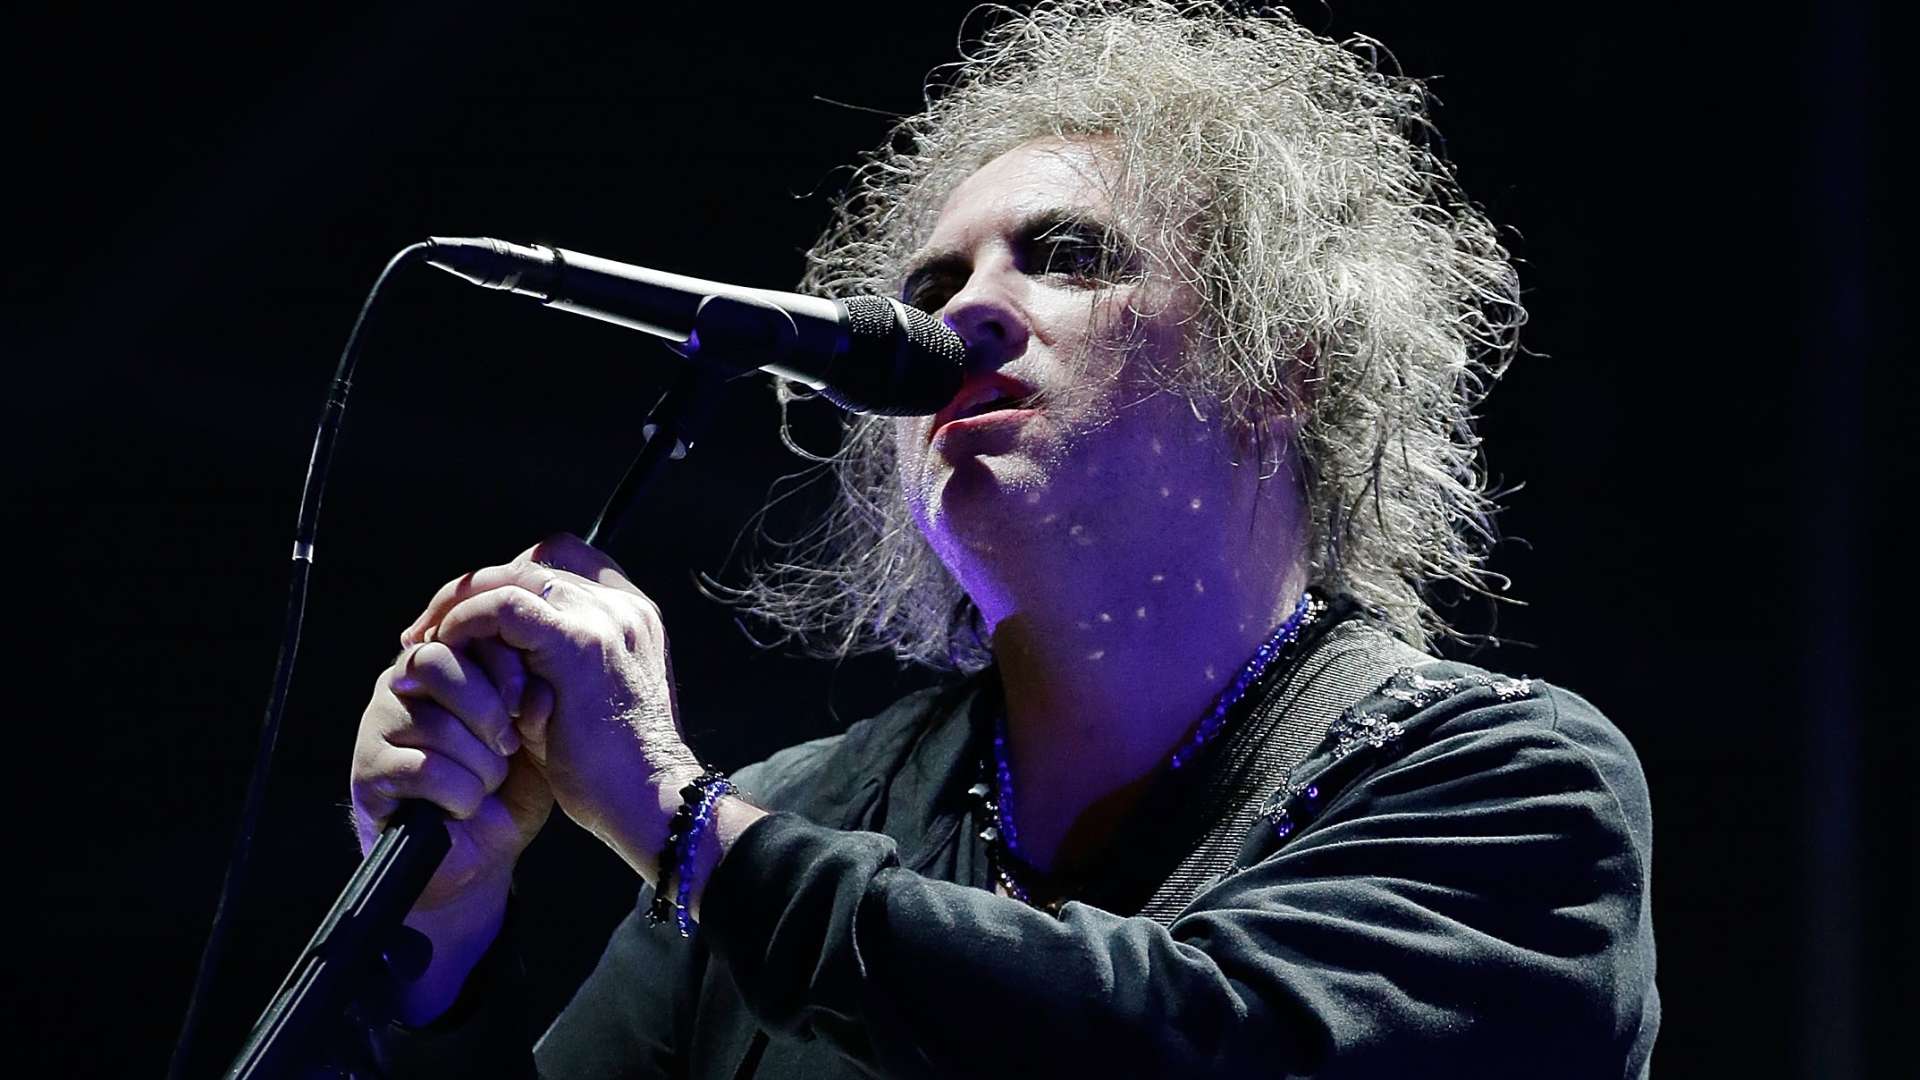 BYRON BAY, AUSTRALIA - JULY 23:  Robert Smith of The Cure performs during Splendour in the Grass 2016 on July 23, 2016 in Byron Bay, Australia.  (Photo by Mark Metcalfe/Getty Images)